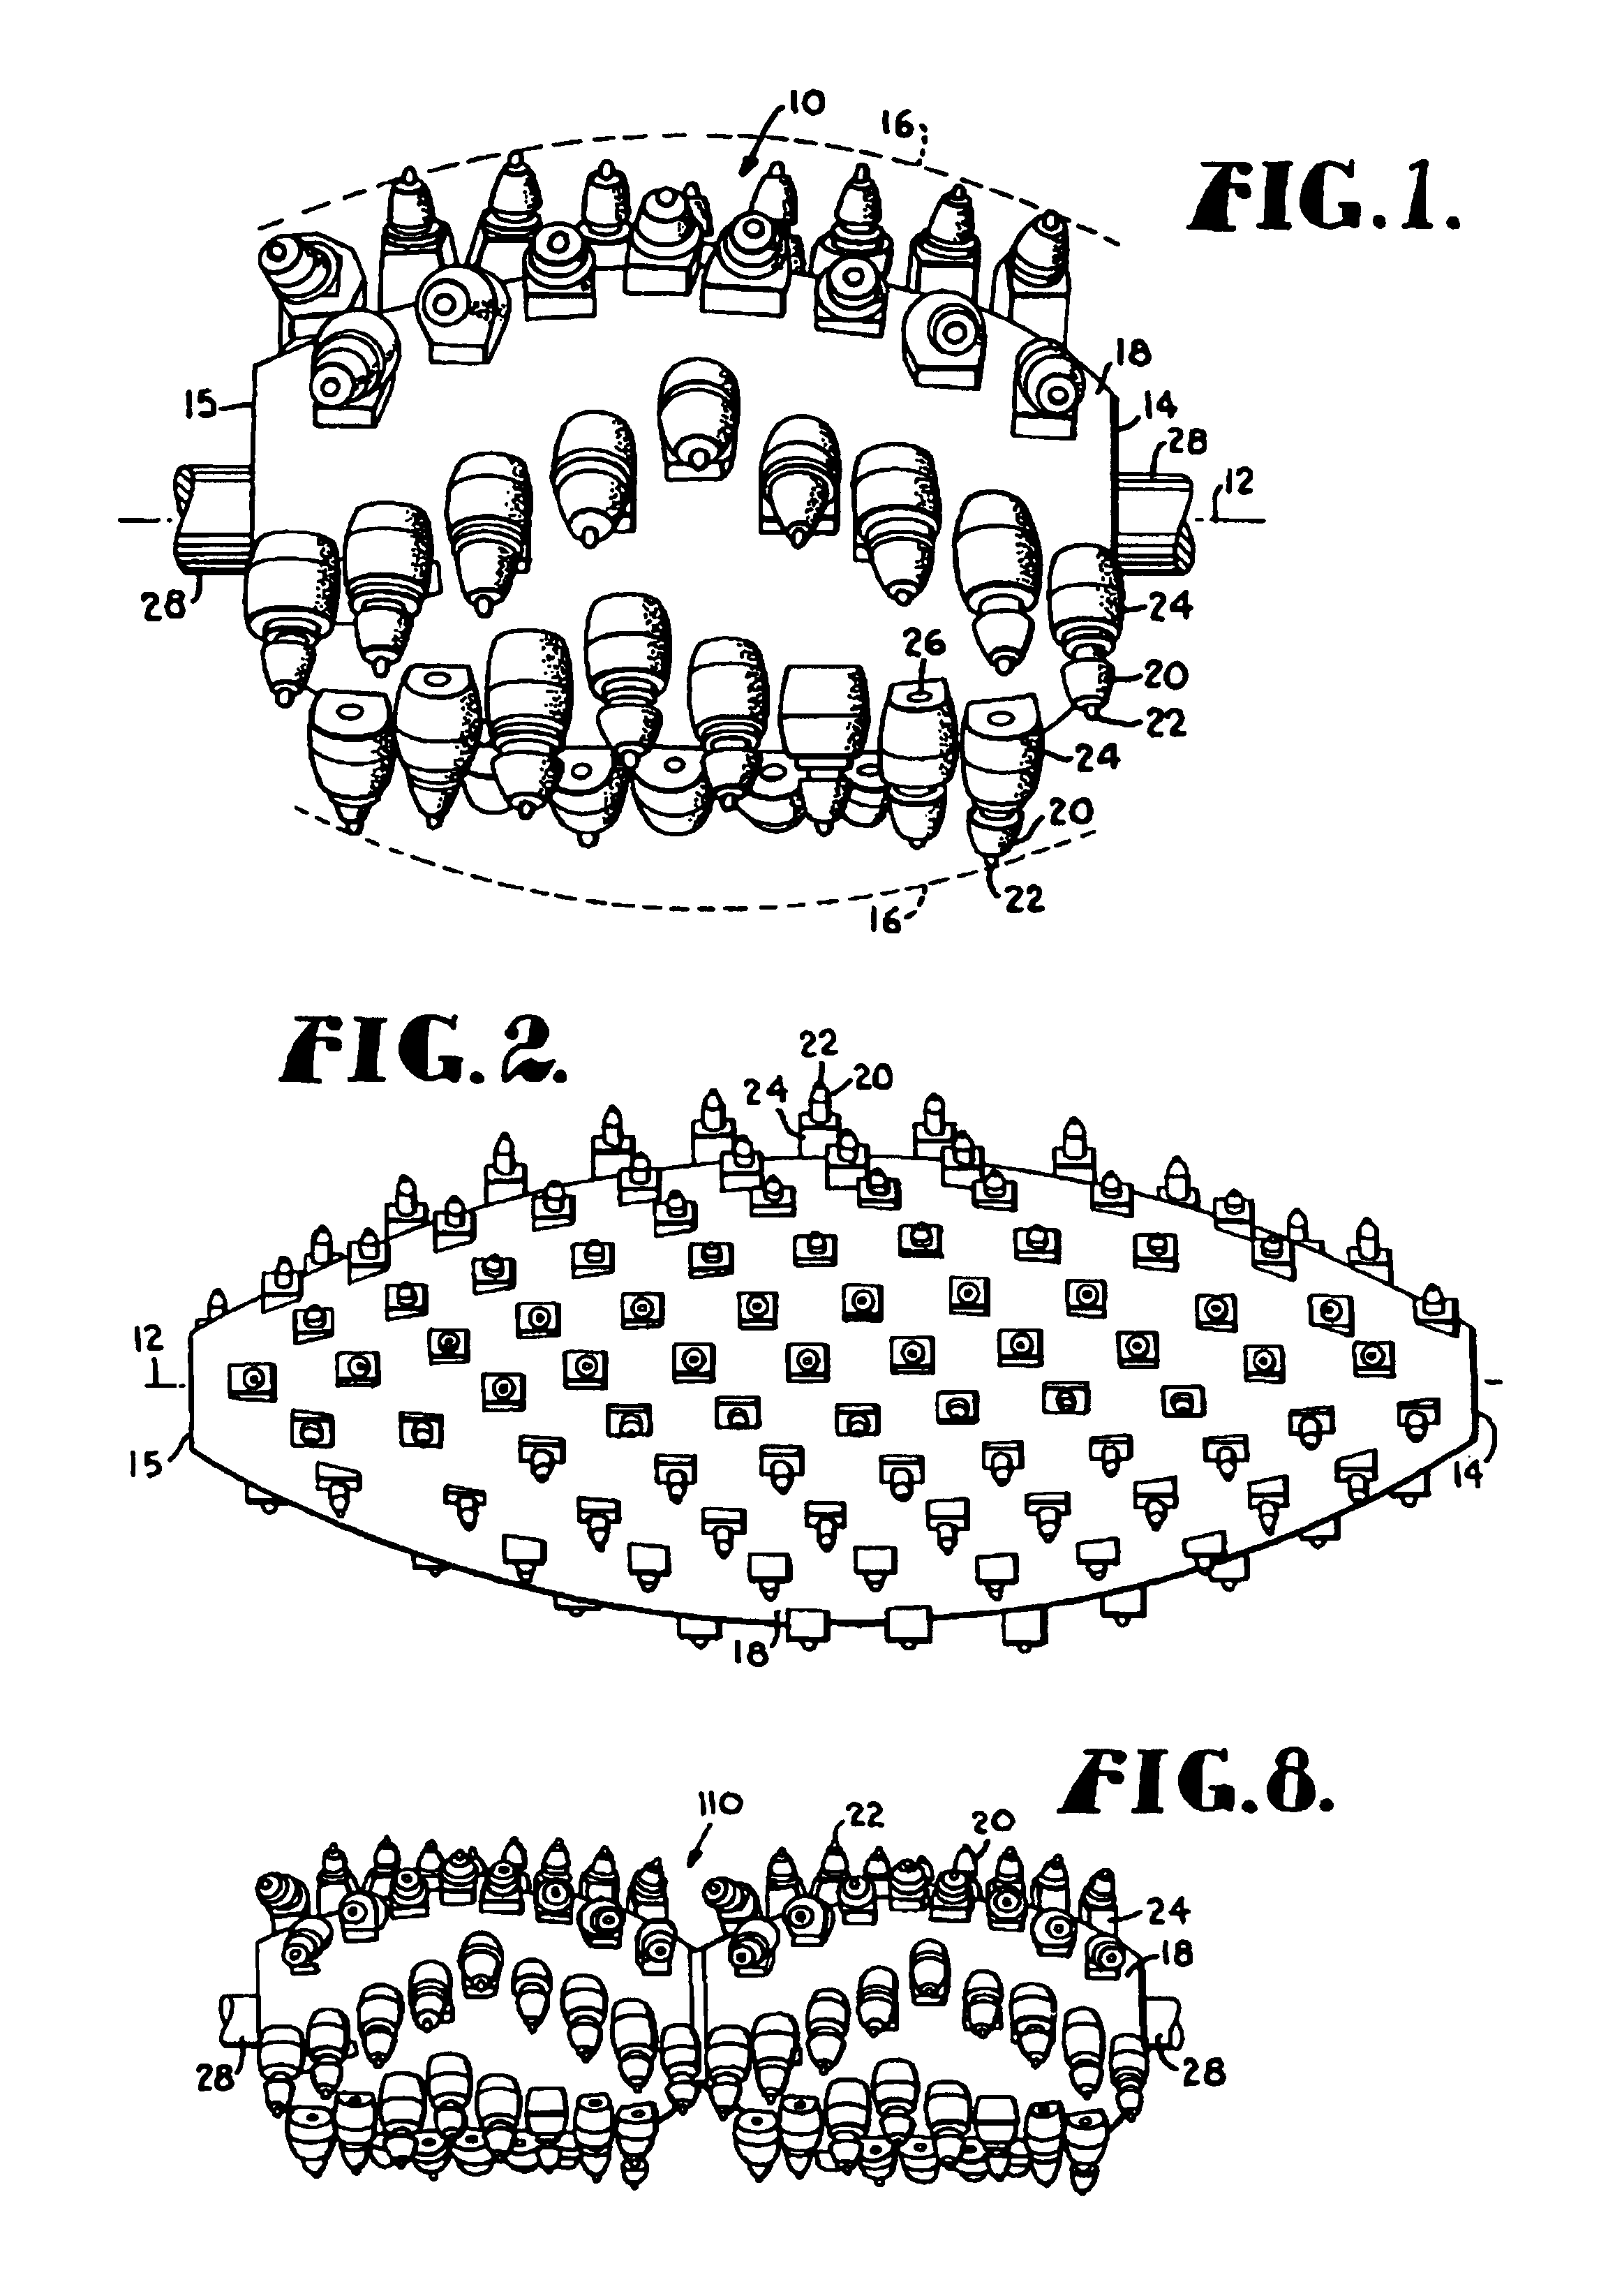 Apparatus for cutting rumble strips in a road surface